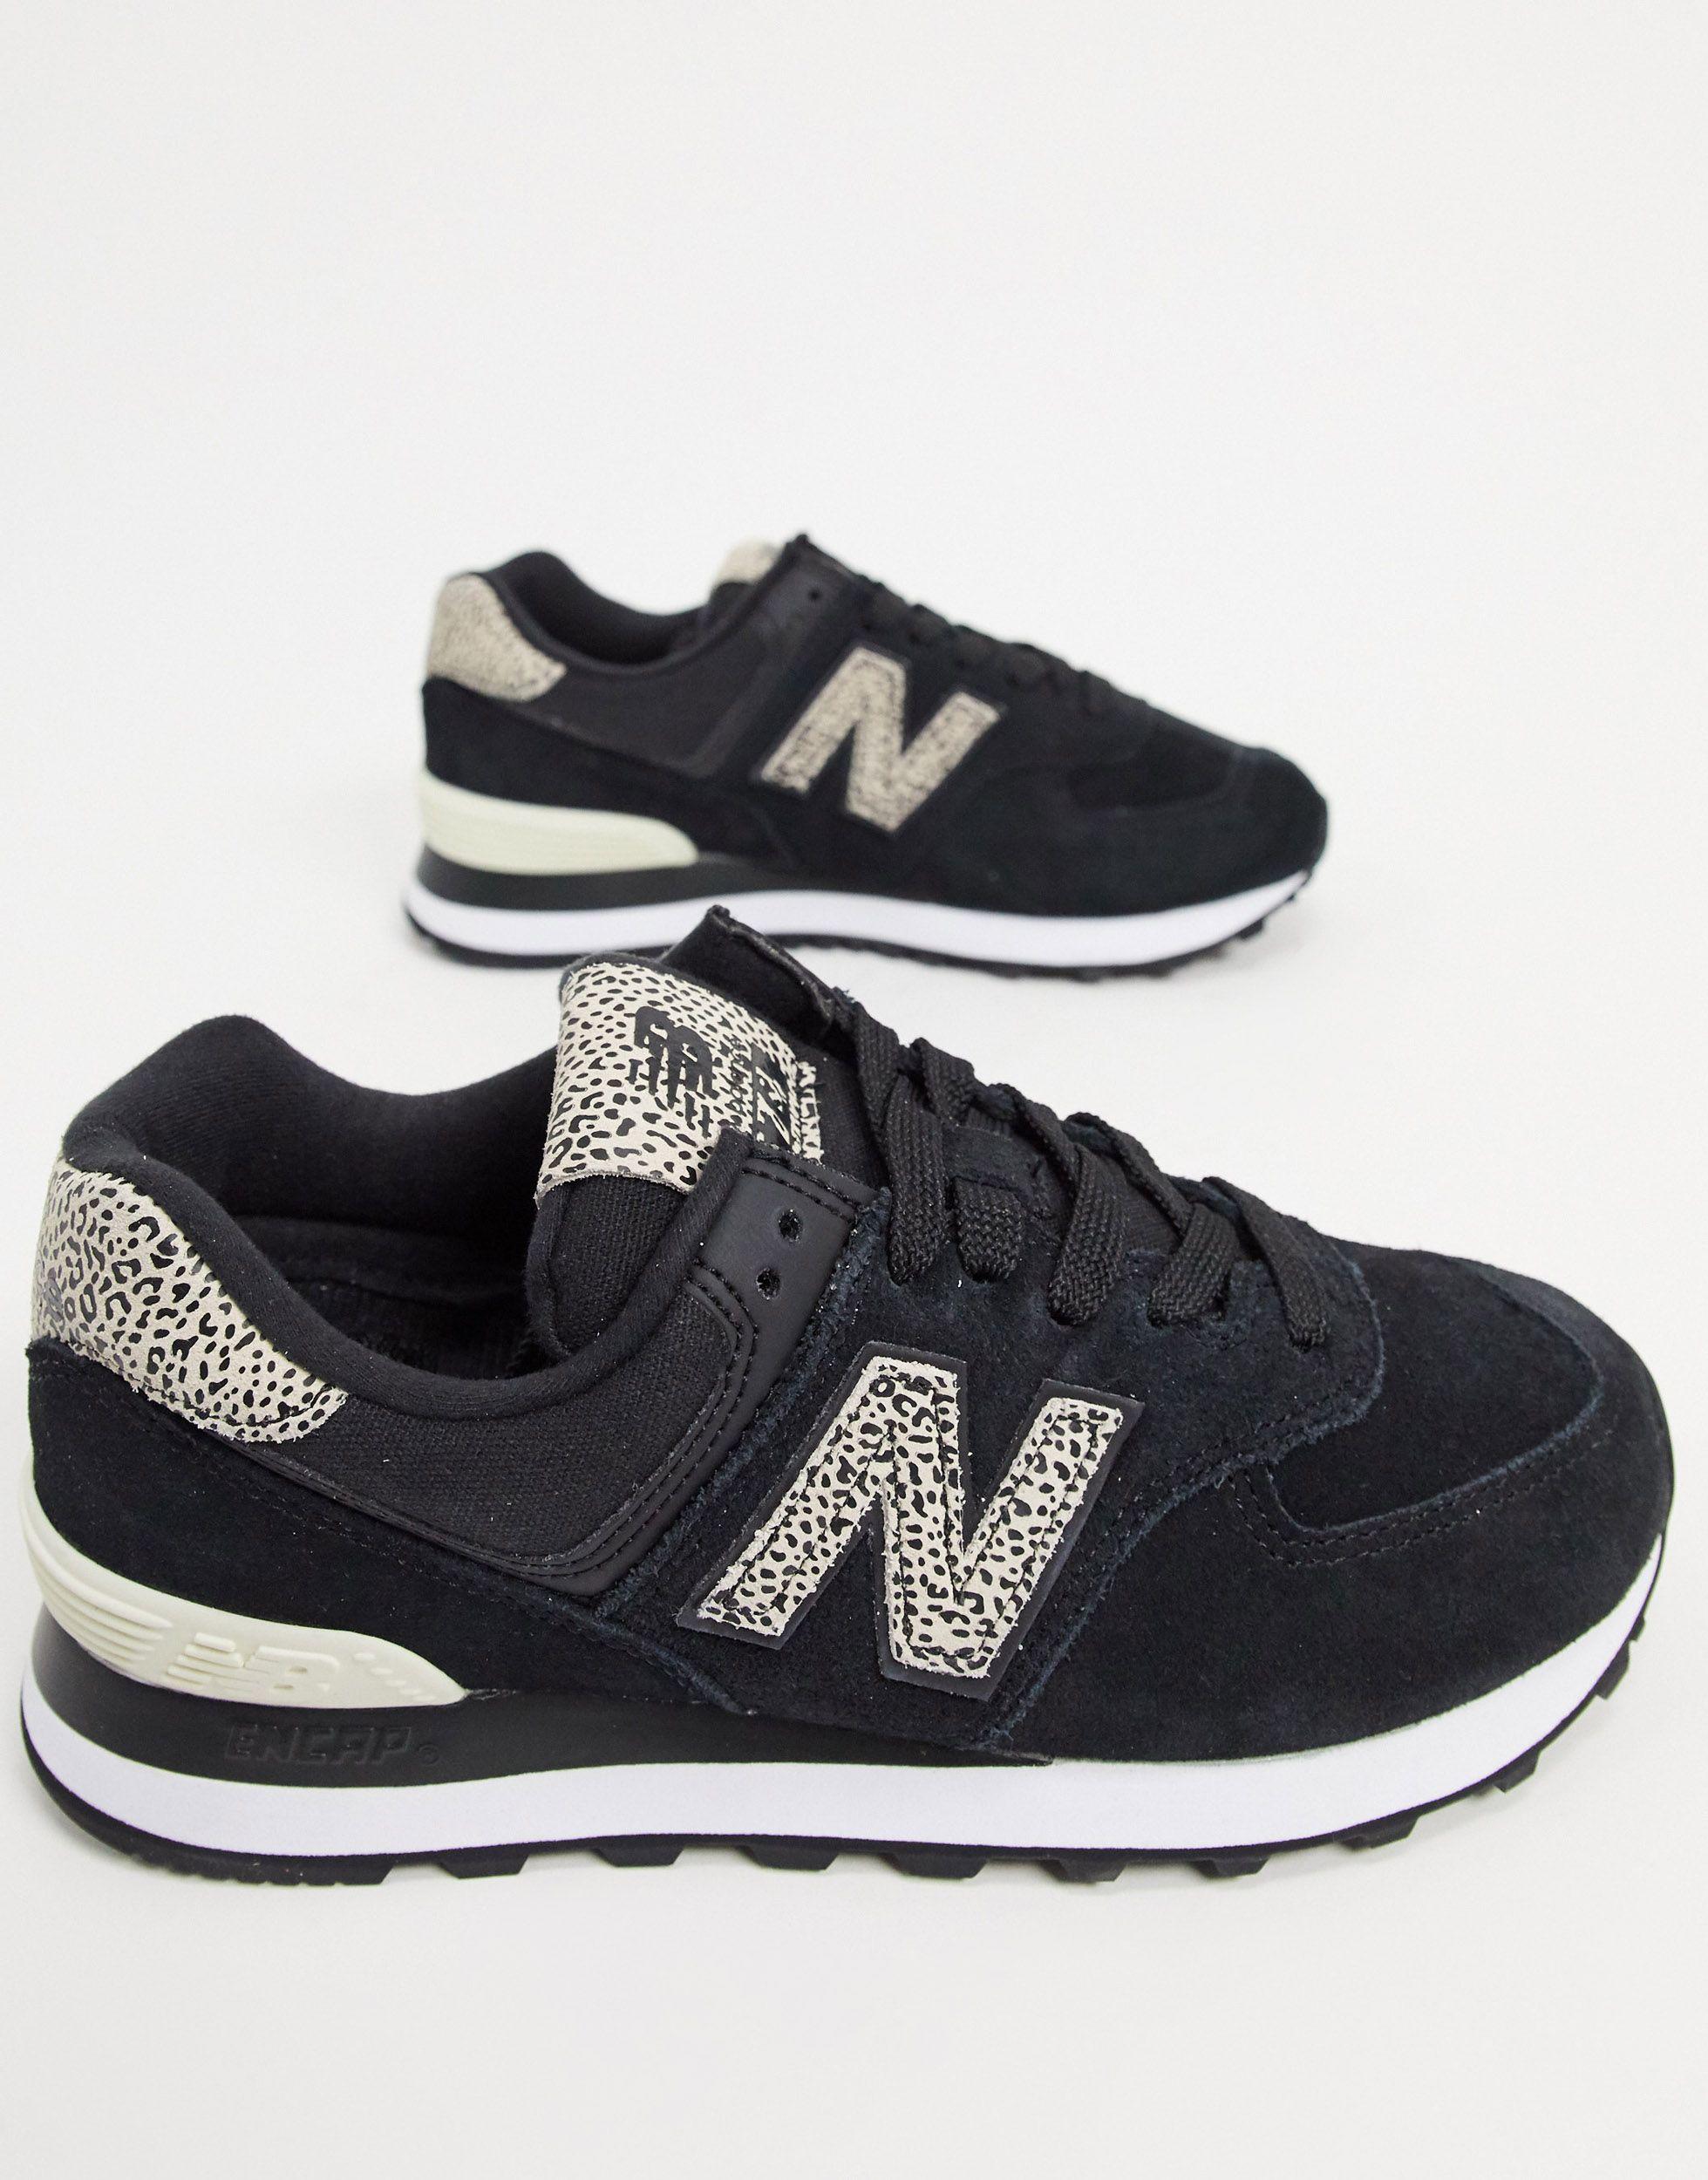 New Balance Rubber 574 Animal Print Trainers in Black - Lyst